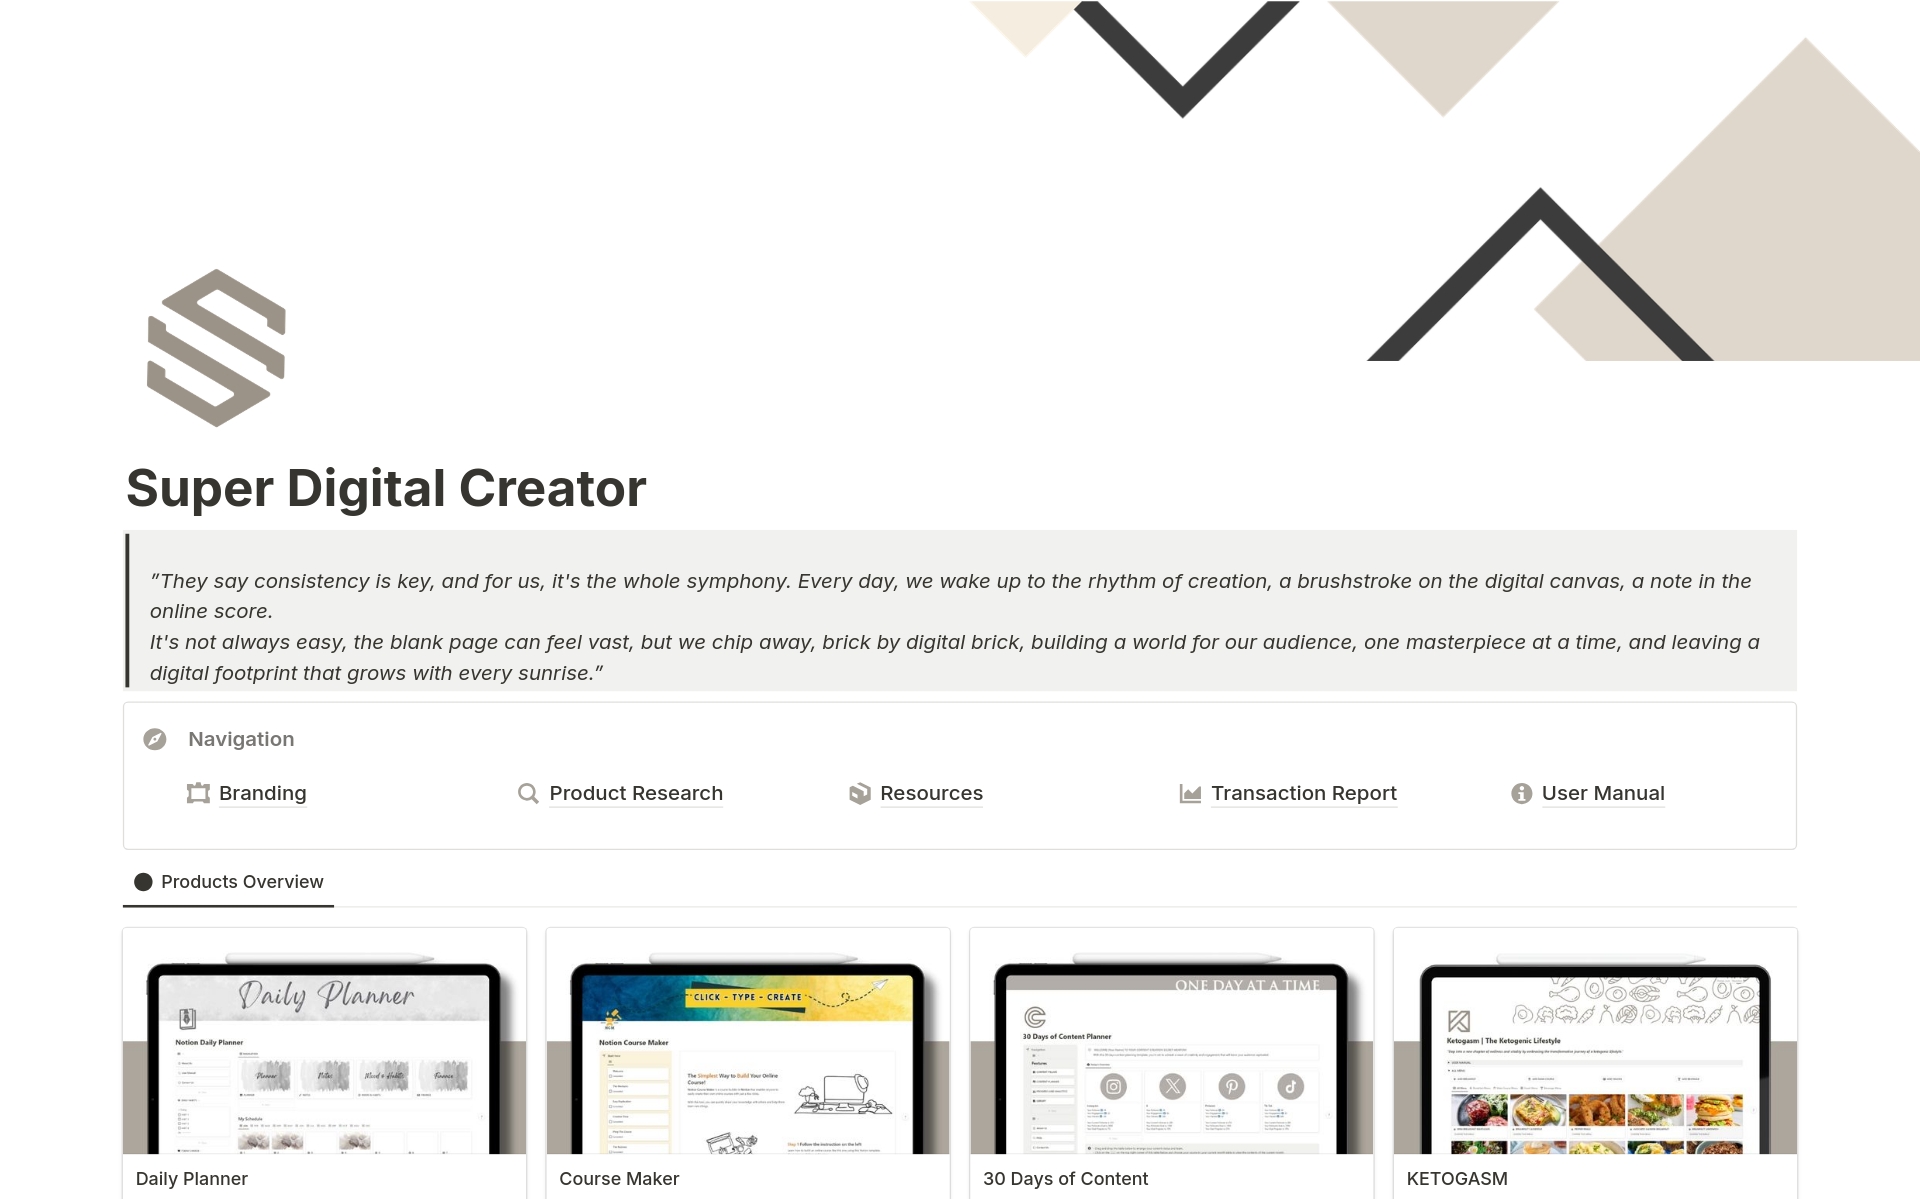 Super Digital Creator is the ultimate toolkit for digital entrepreneurs and digital creators. From defining your brand niche to developing and marketing your products, this all-in-one template streamlines every step of your digital journey.